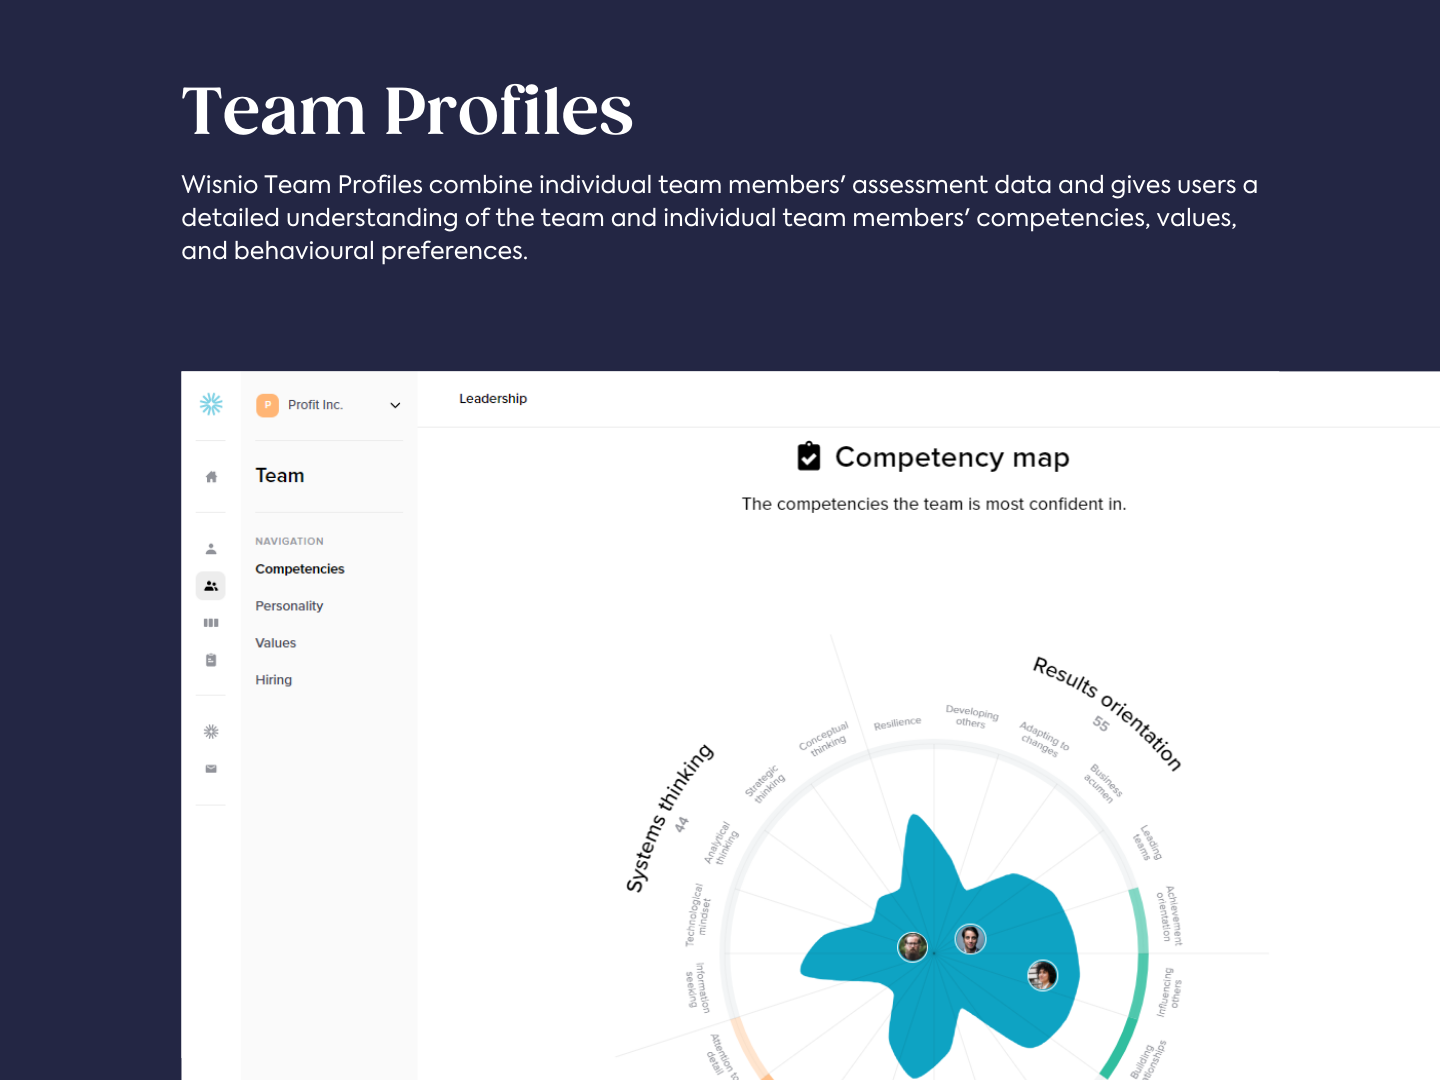 Team Profiles give you a detailed understanding of your team members' competencies, values, and behavioural preferences.